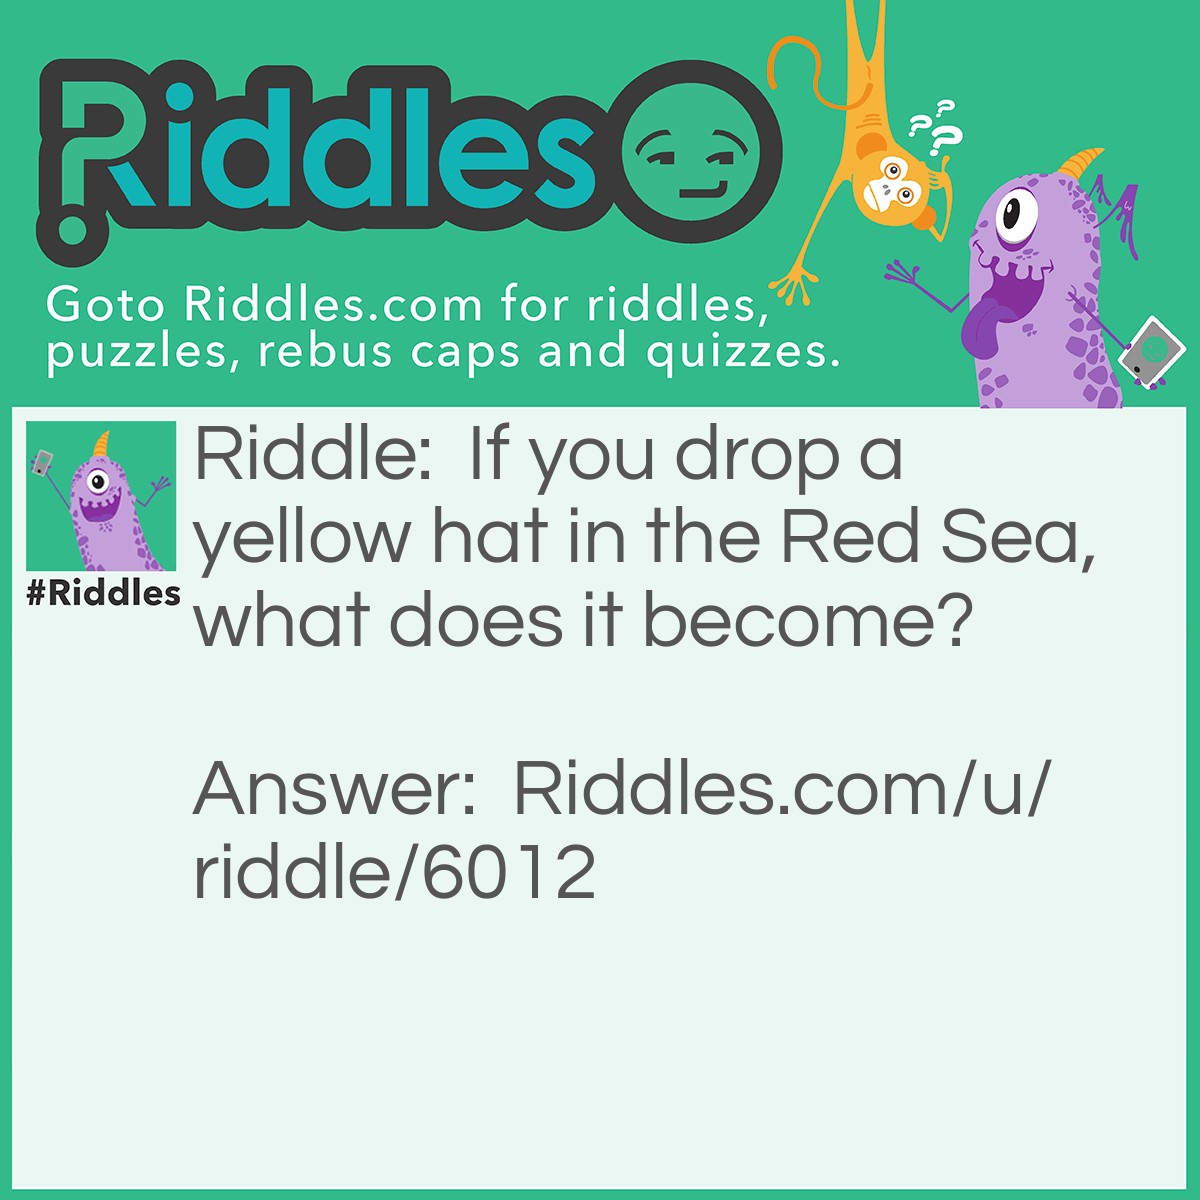 Riddle: If you drop a yellow hat in the Red Sea, what does it become? Answer: Wet.